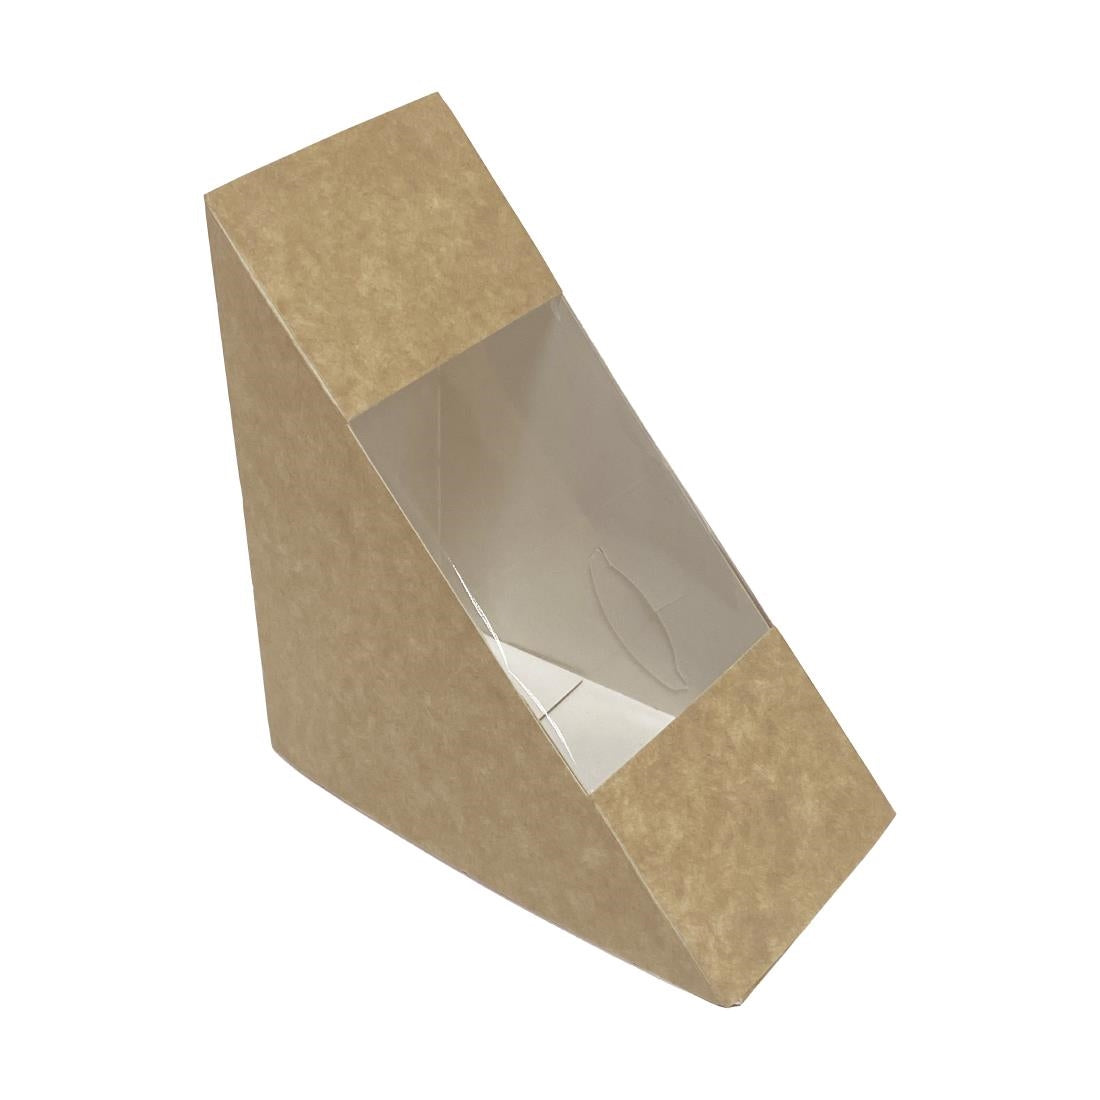 FT650 Fiesta Recyclable Standard Sandwich Wedge with PET window 65mm (Pack of 500) JD Catering Equipment Solutions Ltd